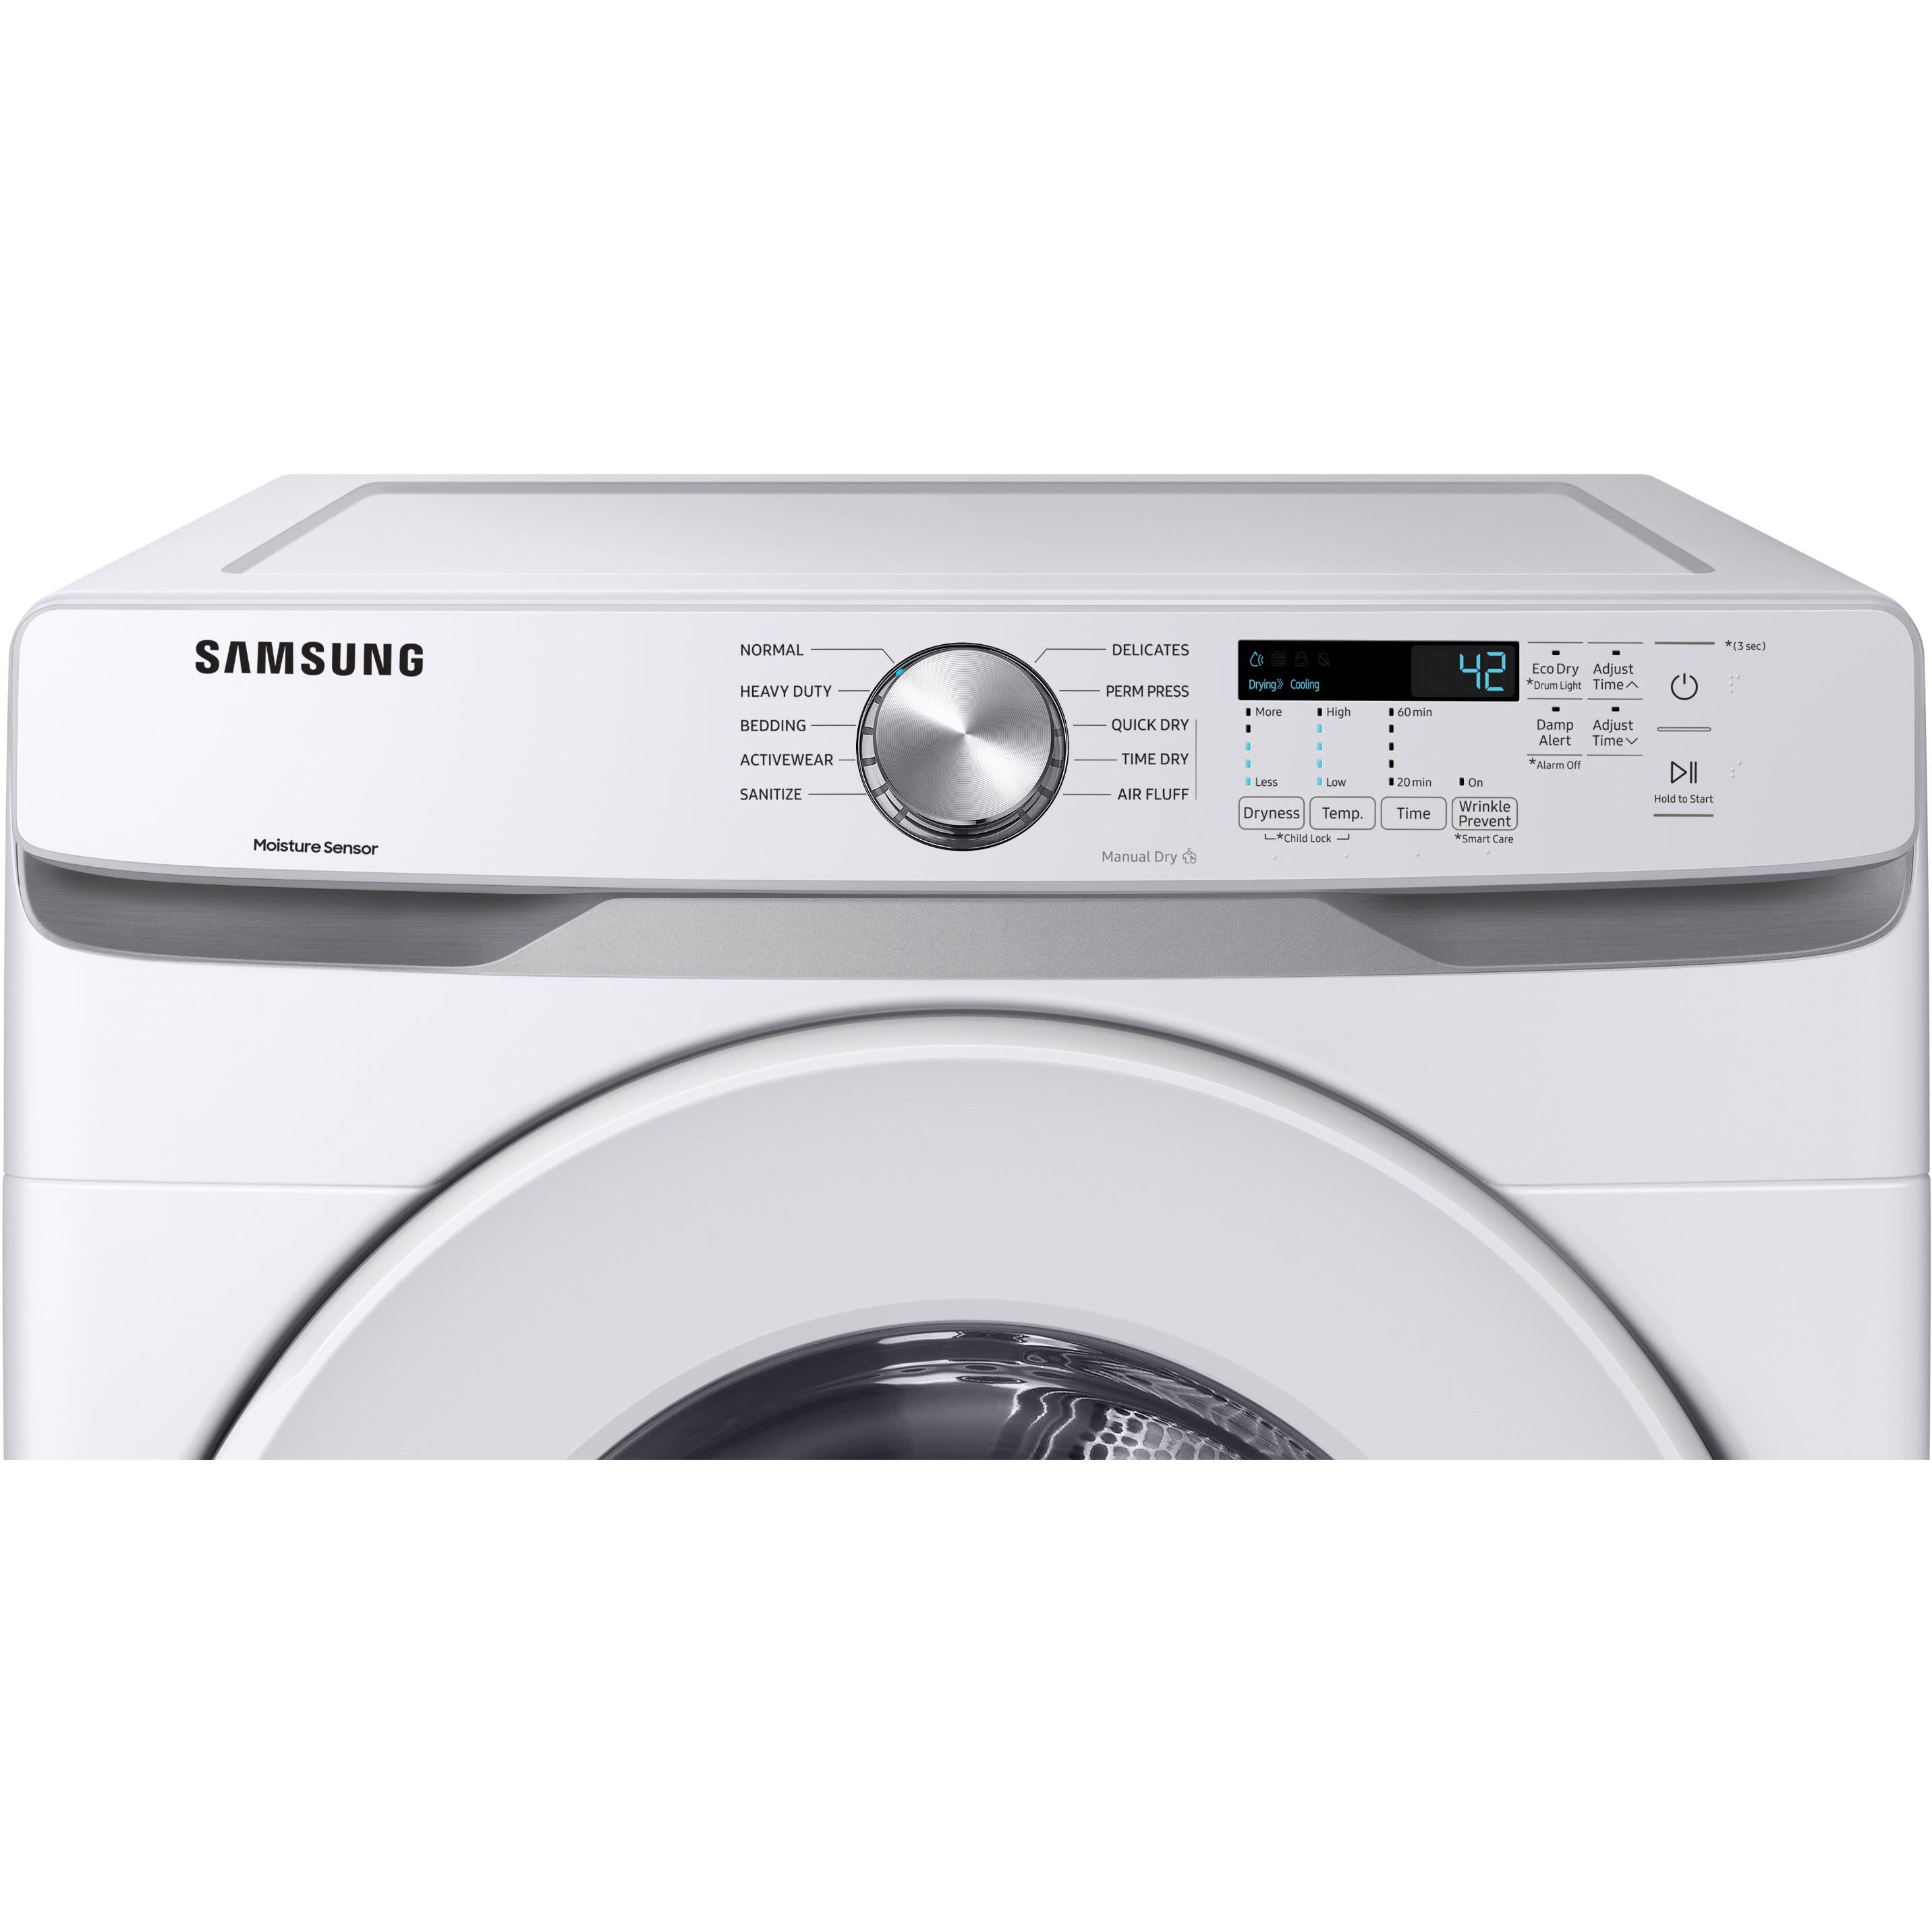 Samsung 7.5 cu.ft. Gas Dryer with Smart Care DVG45T6000W/A3